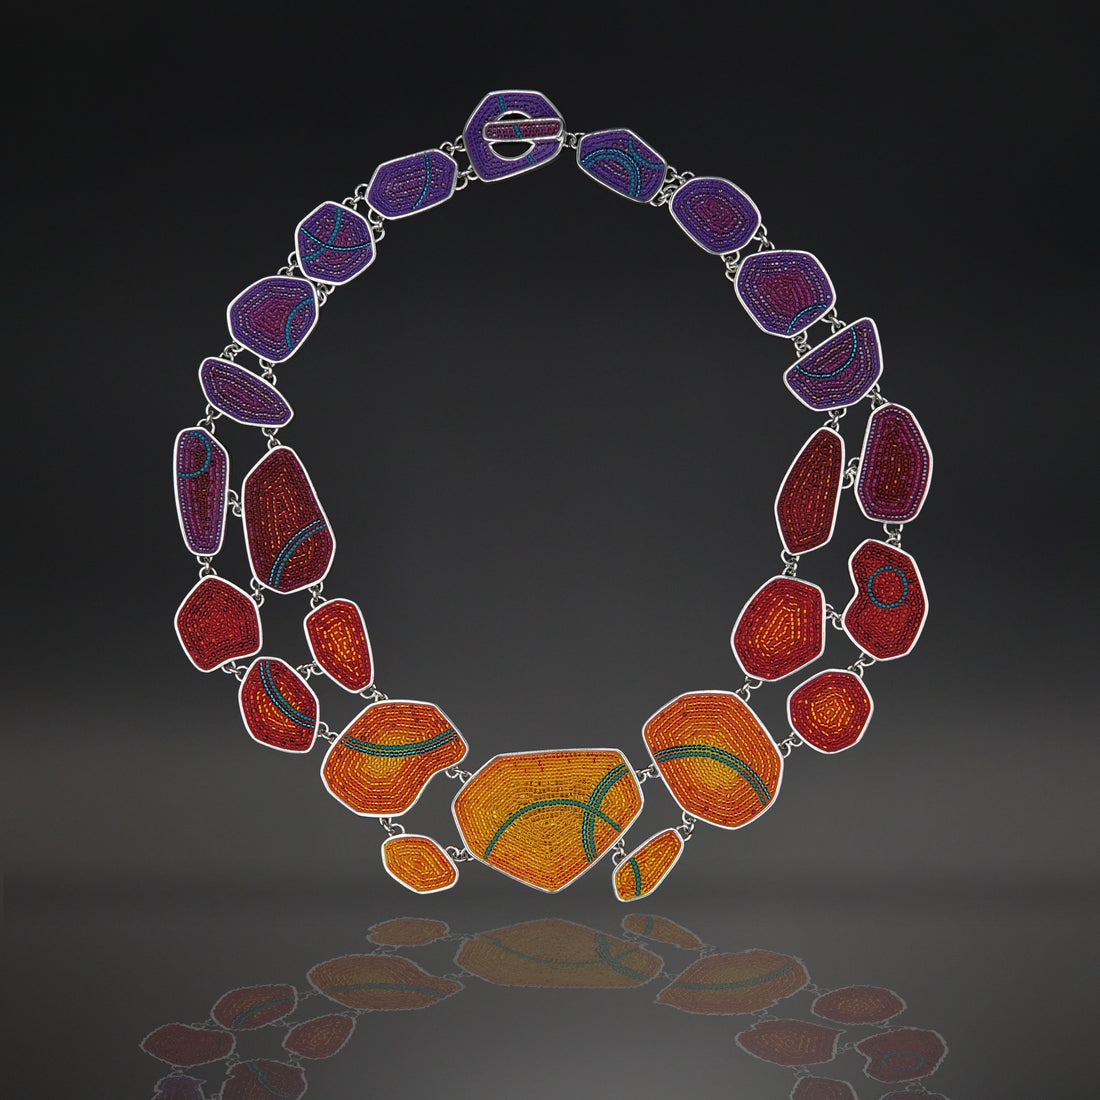 Micro-mosaic necklace made up of a variety of shapes, like pebbles, with a toggle clasp. In warm shades from yellow to plum.